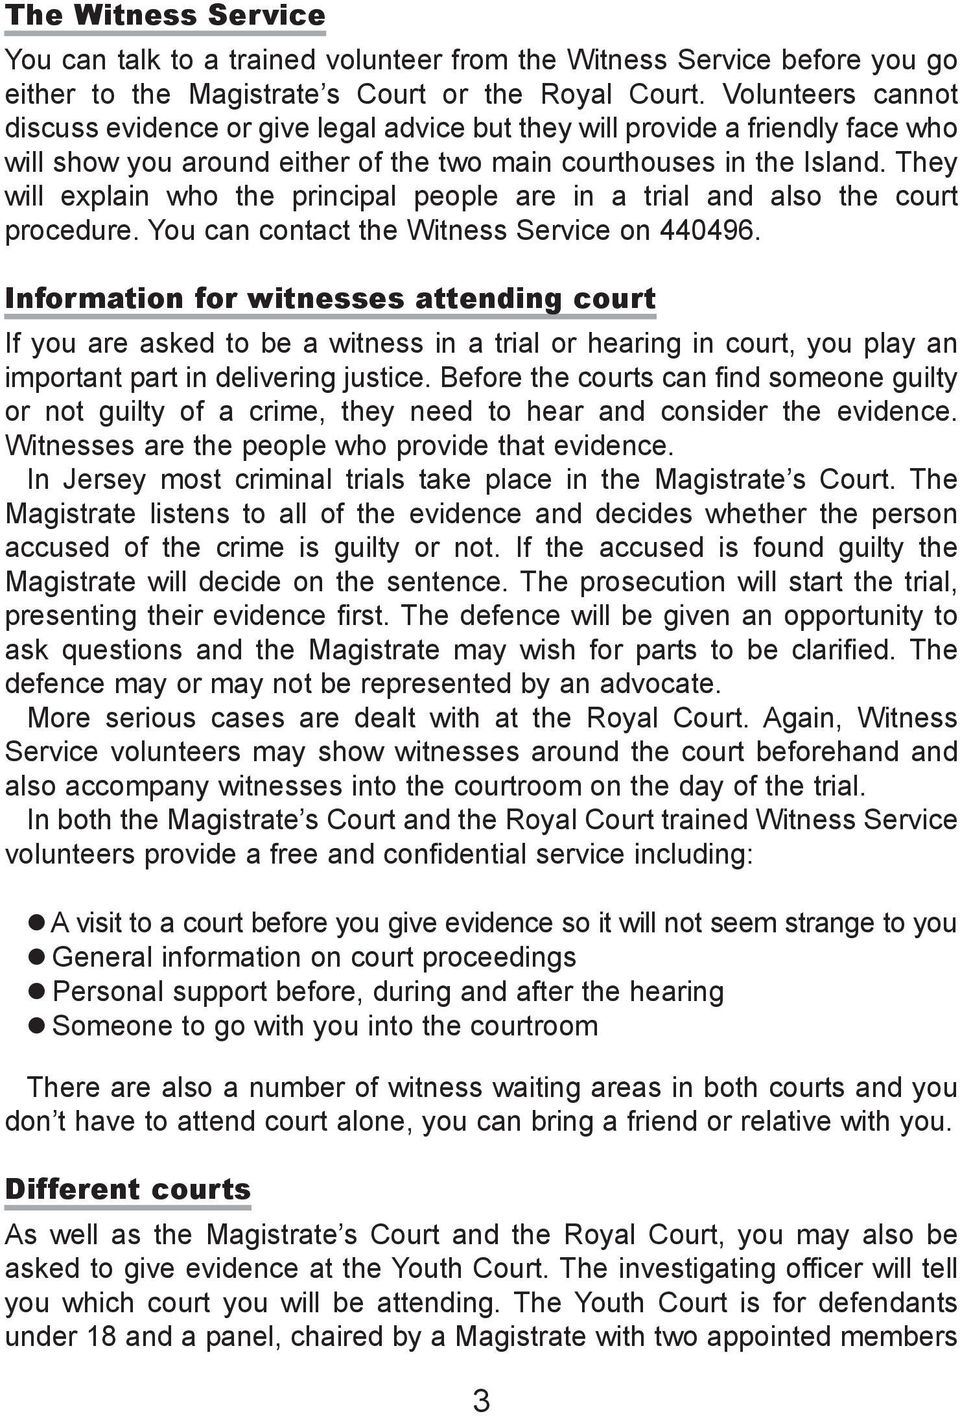 They will explain who the principal people are in a trial and also the court procedure. You can contact the Witness Service on 440496.